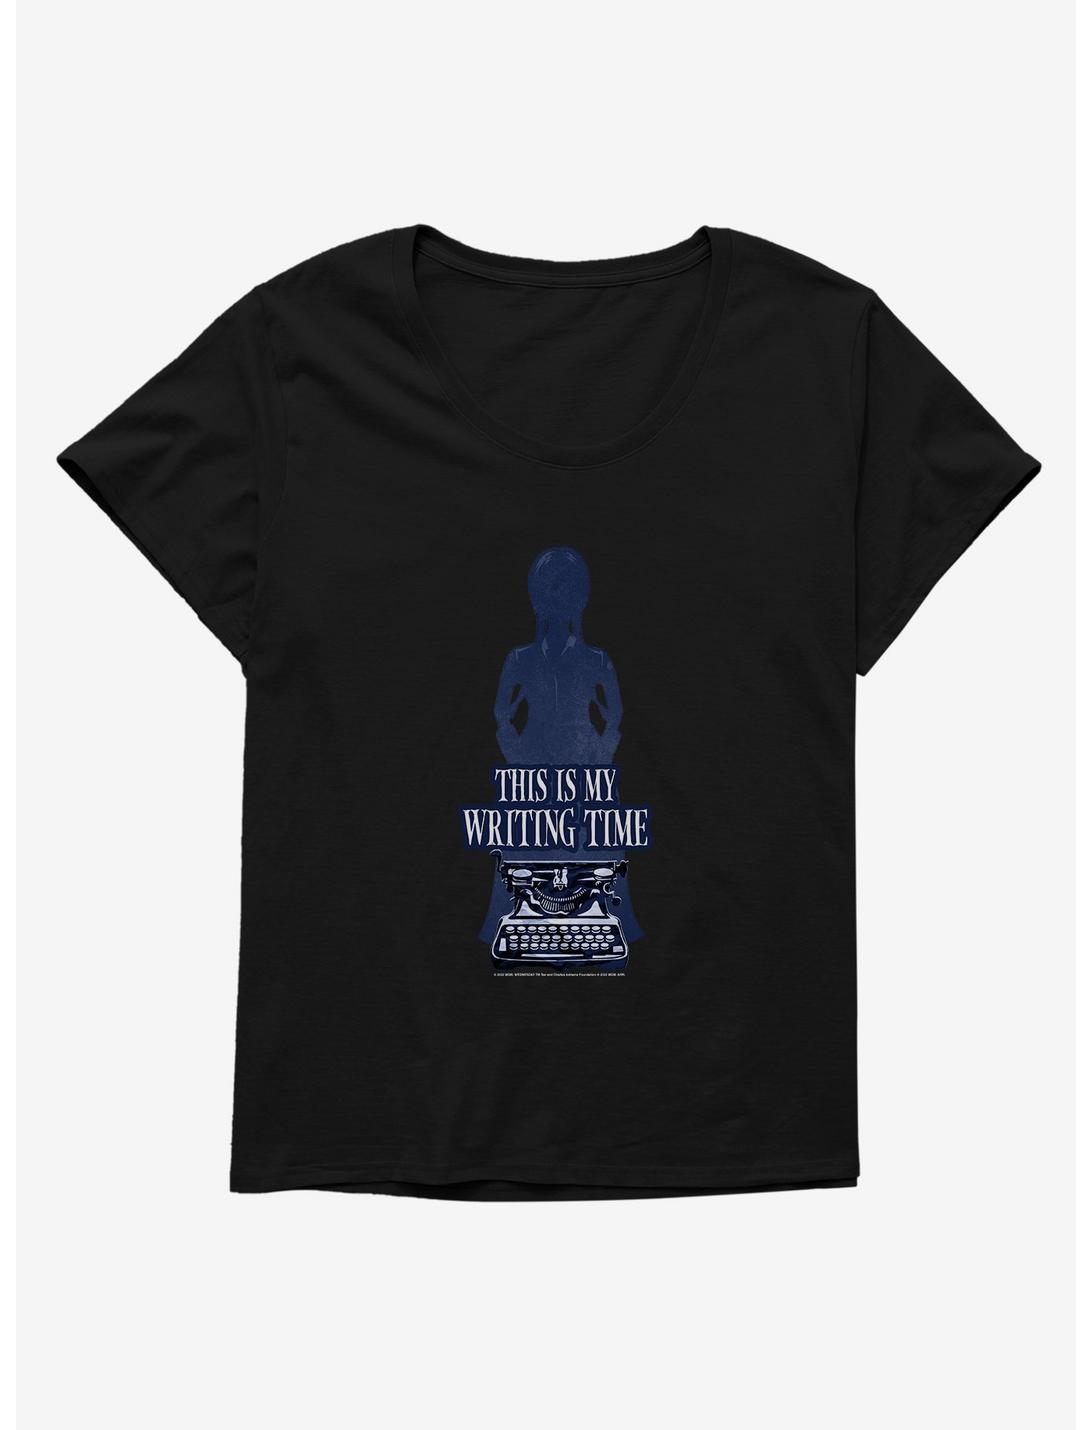 Wednesday My Writing Time Womens T-Shirt Plus Size, BLACK, hi-res